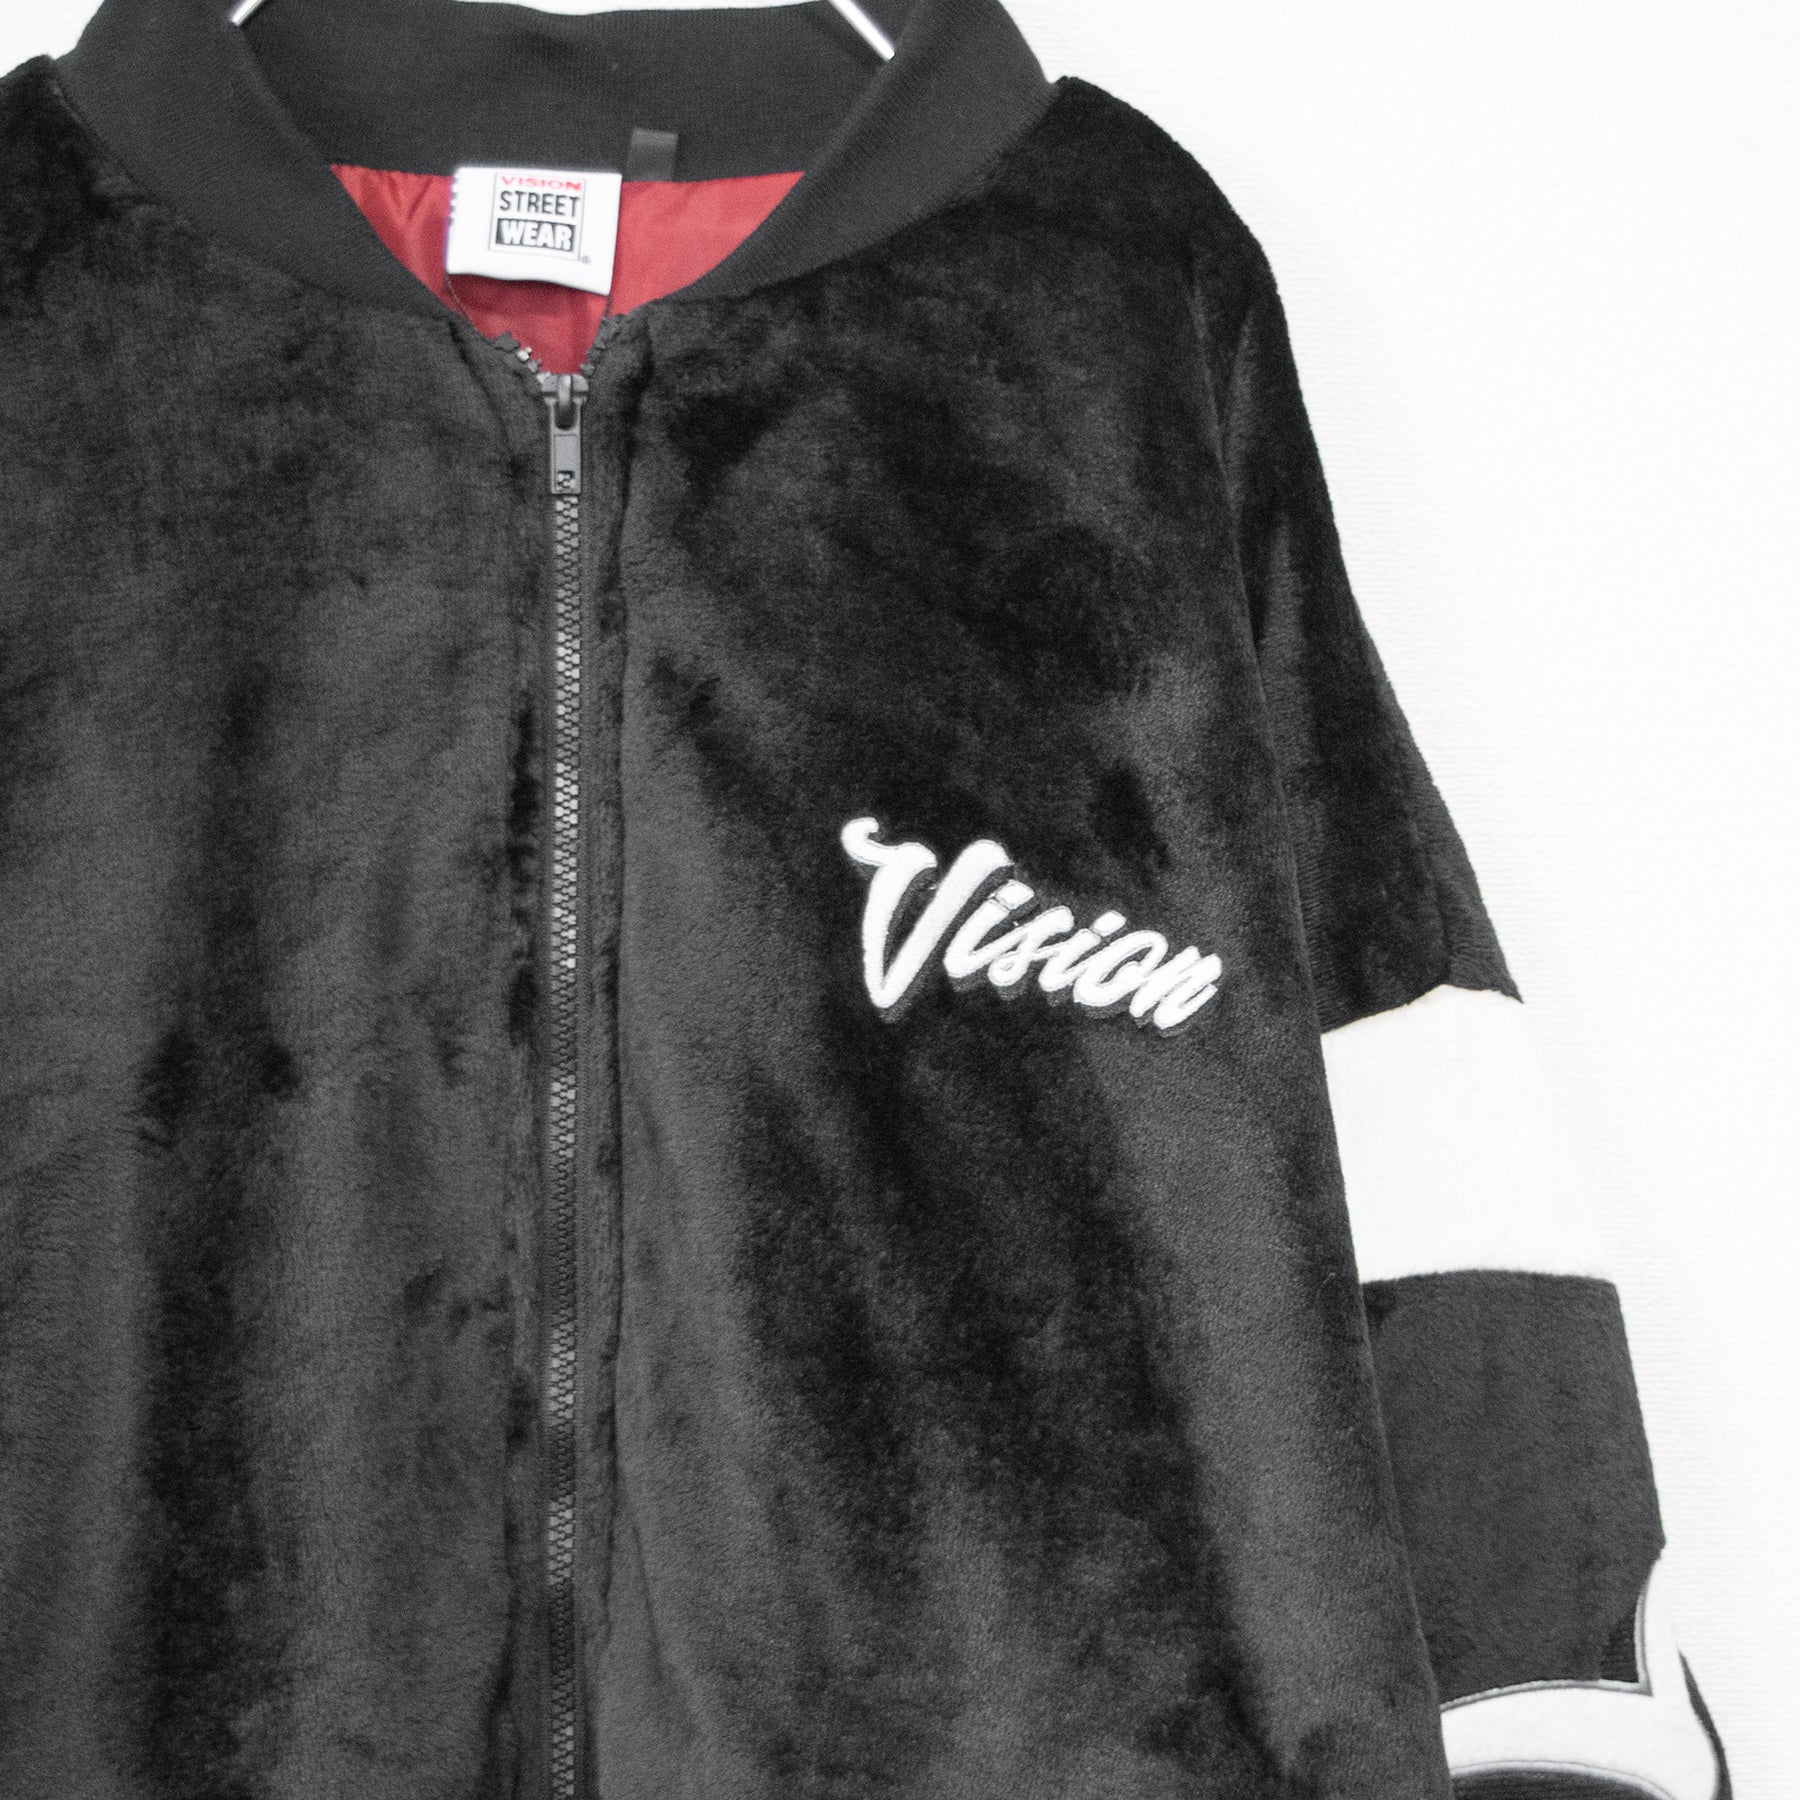 VISION STREET WEAR Patch Sleeve Faux Fur Jacket - YOUAREMYPOISON